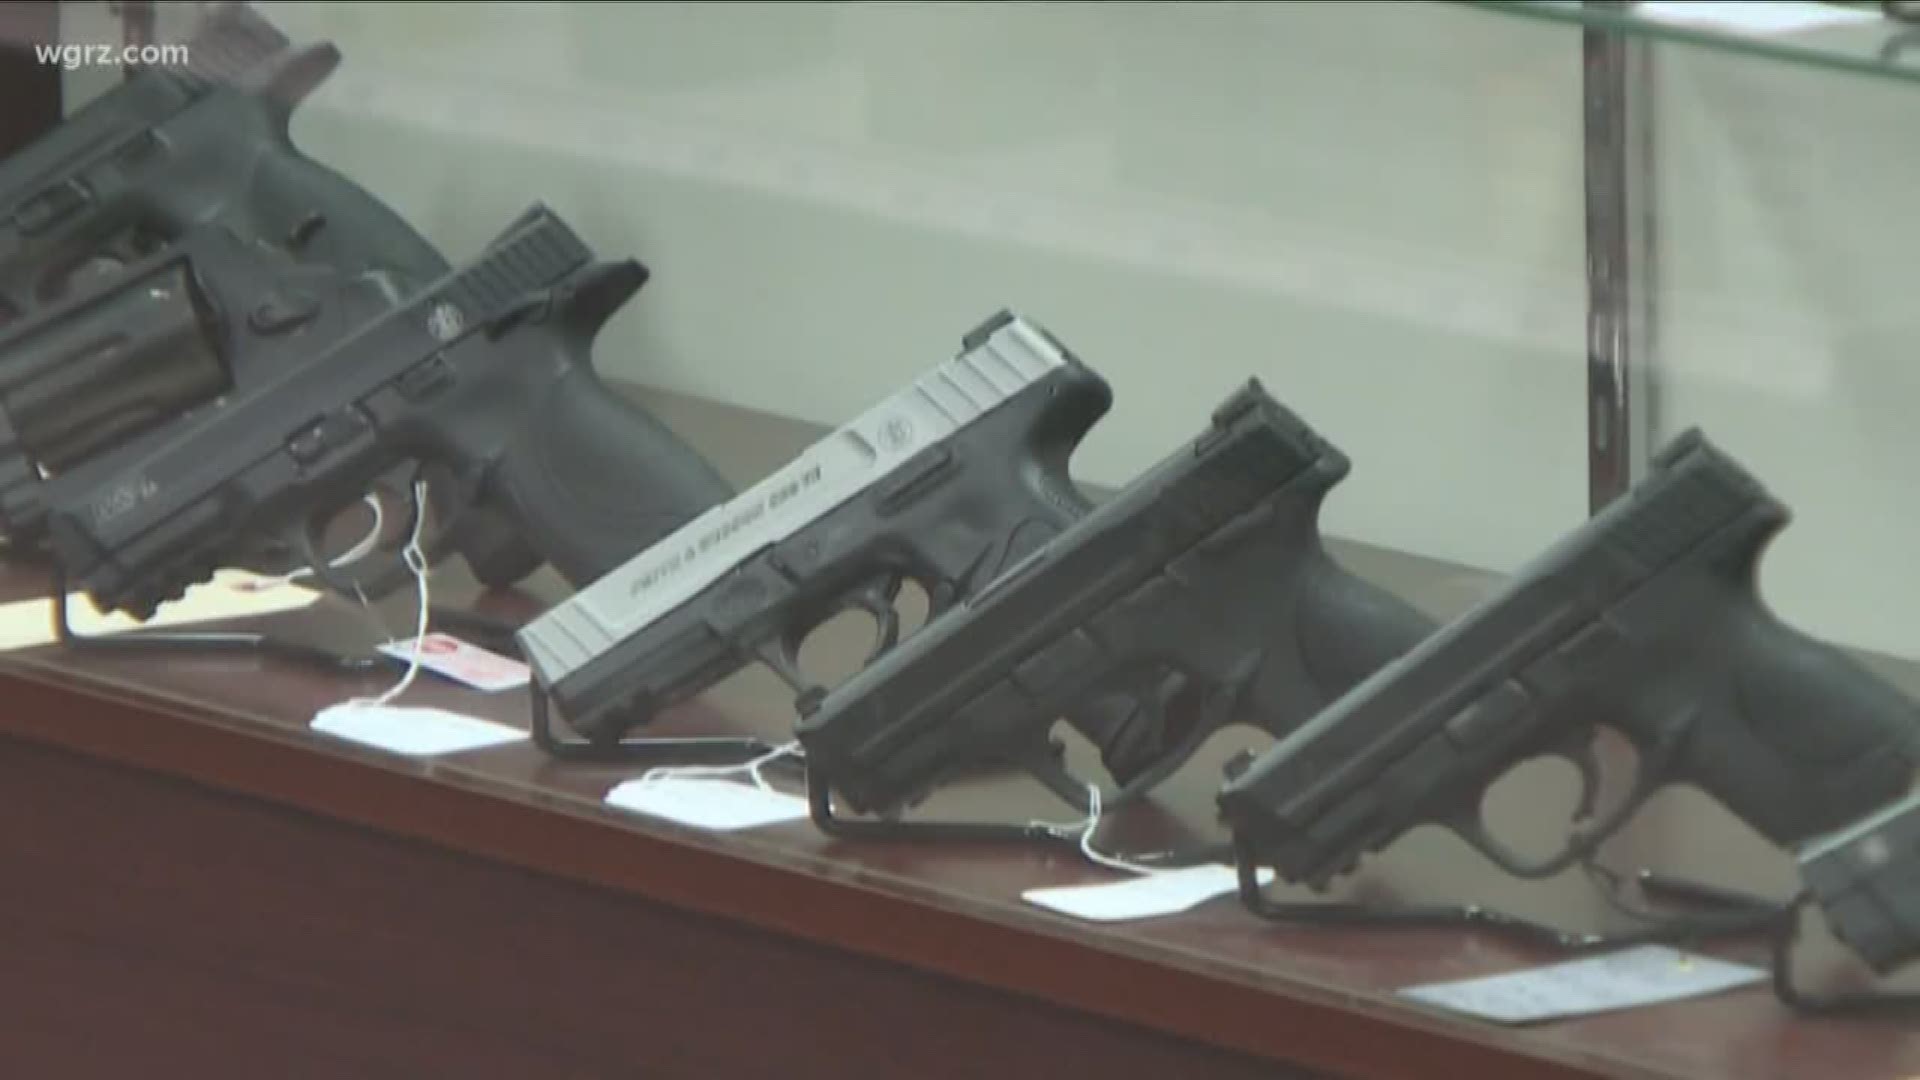 A new Red Flag Law goes into effect on Saturday. It will allow a State Supreme Court Justice to order guns seized from people the Judge finds could be a danger to themselves or others.